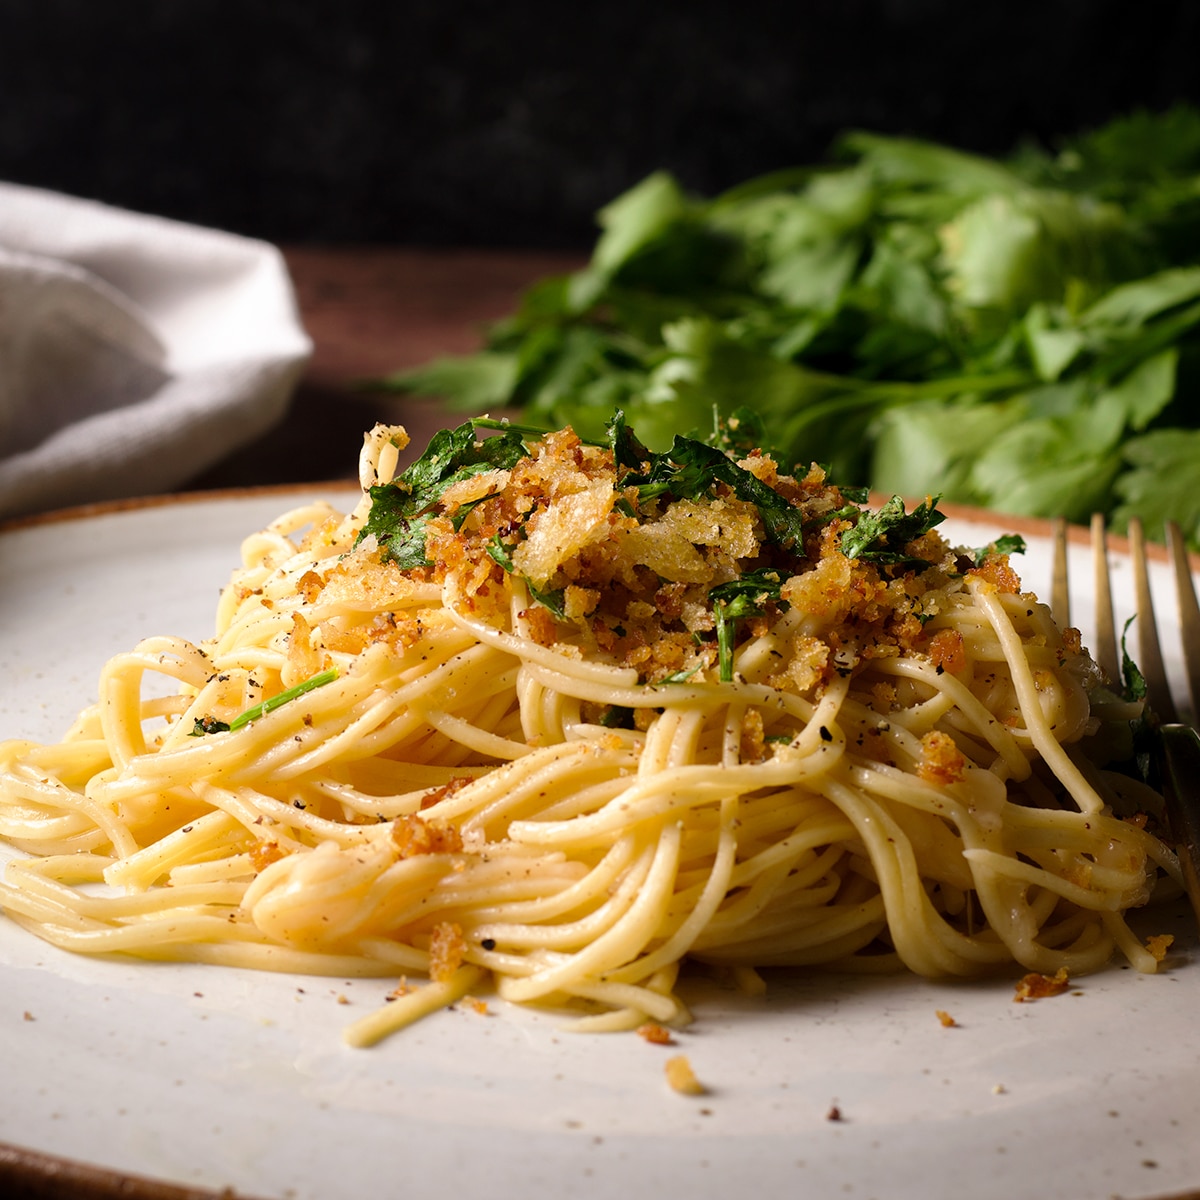 A serving of spaghetti with brown butter sauce topped with bread crumbs on a white plate.